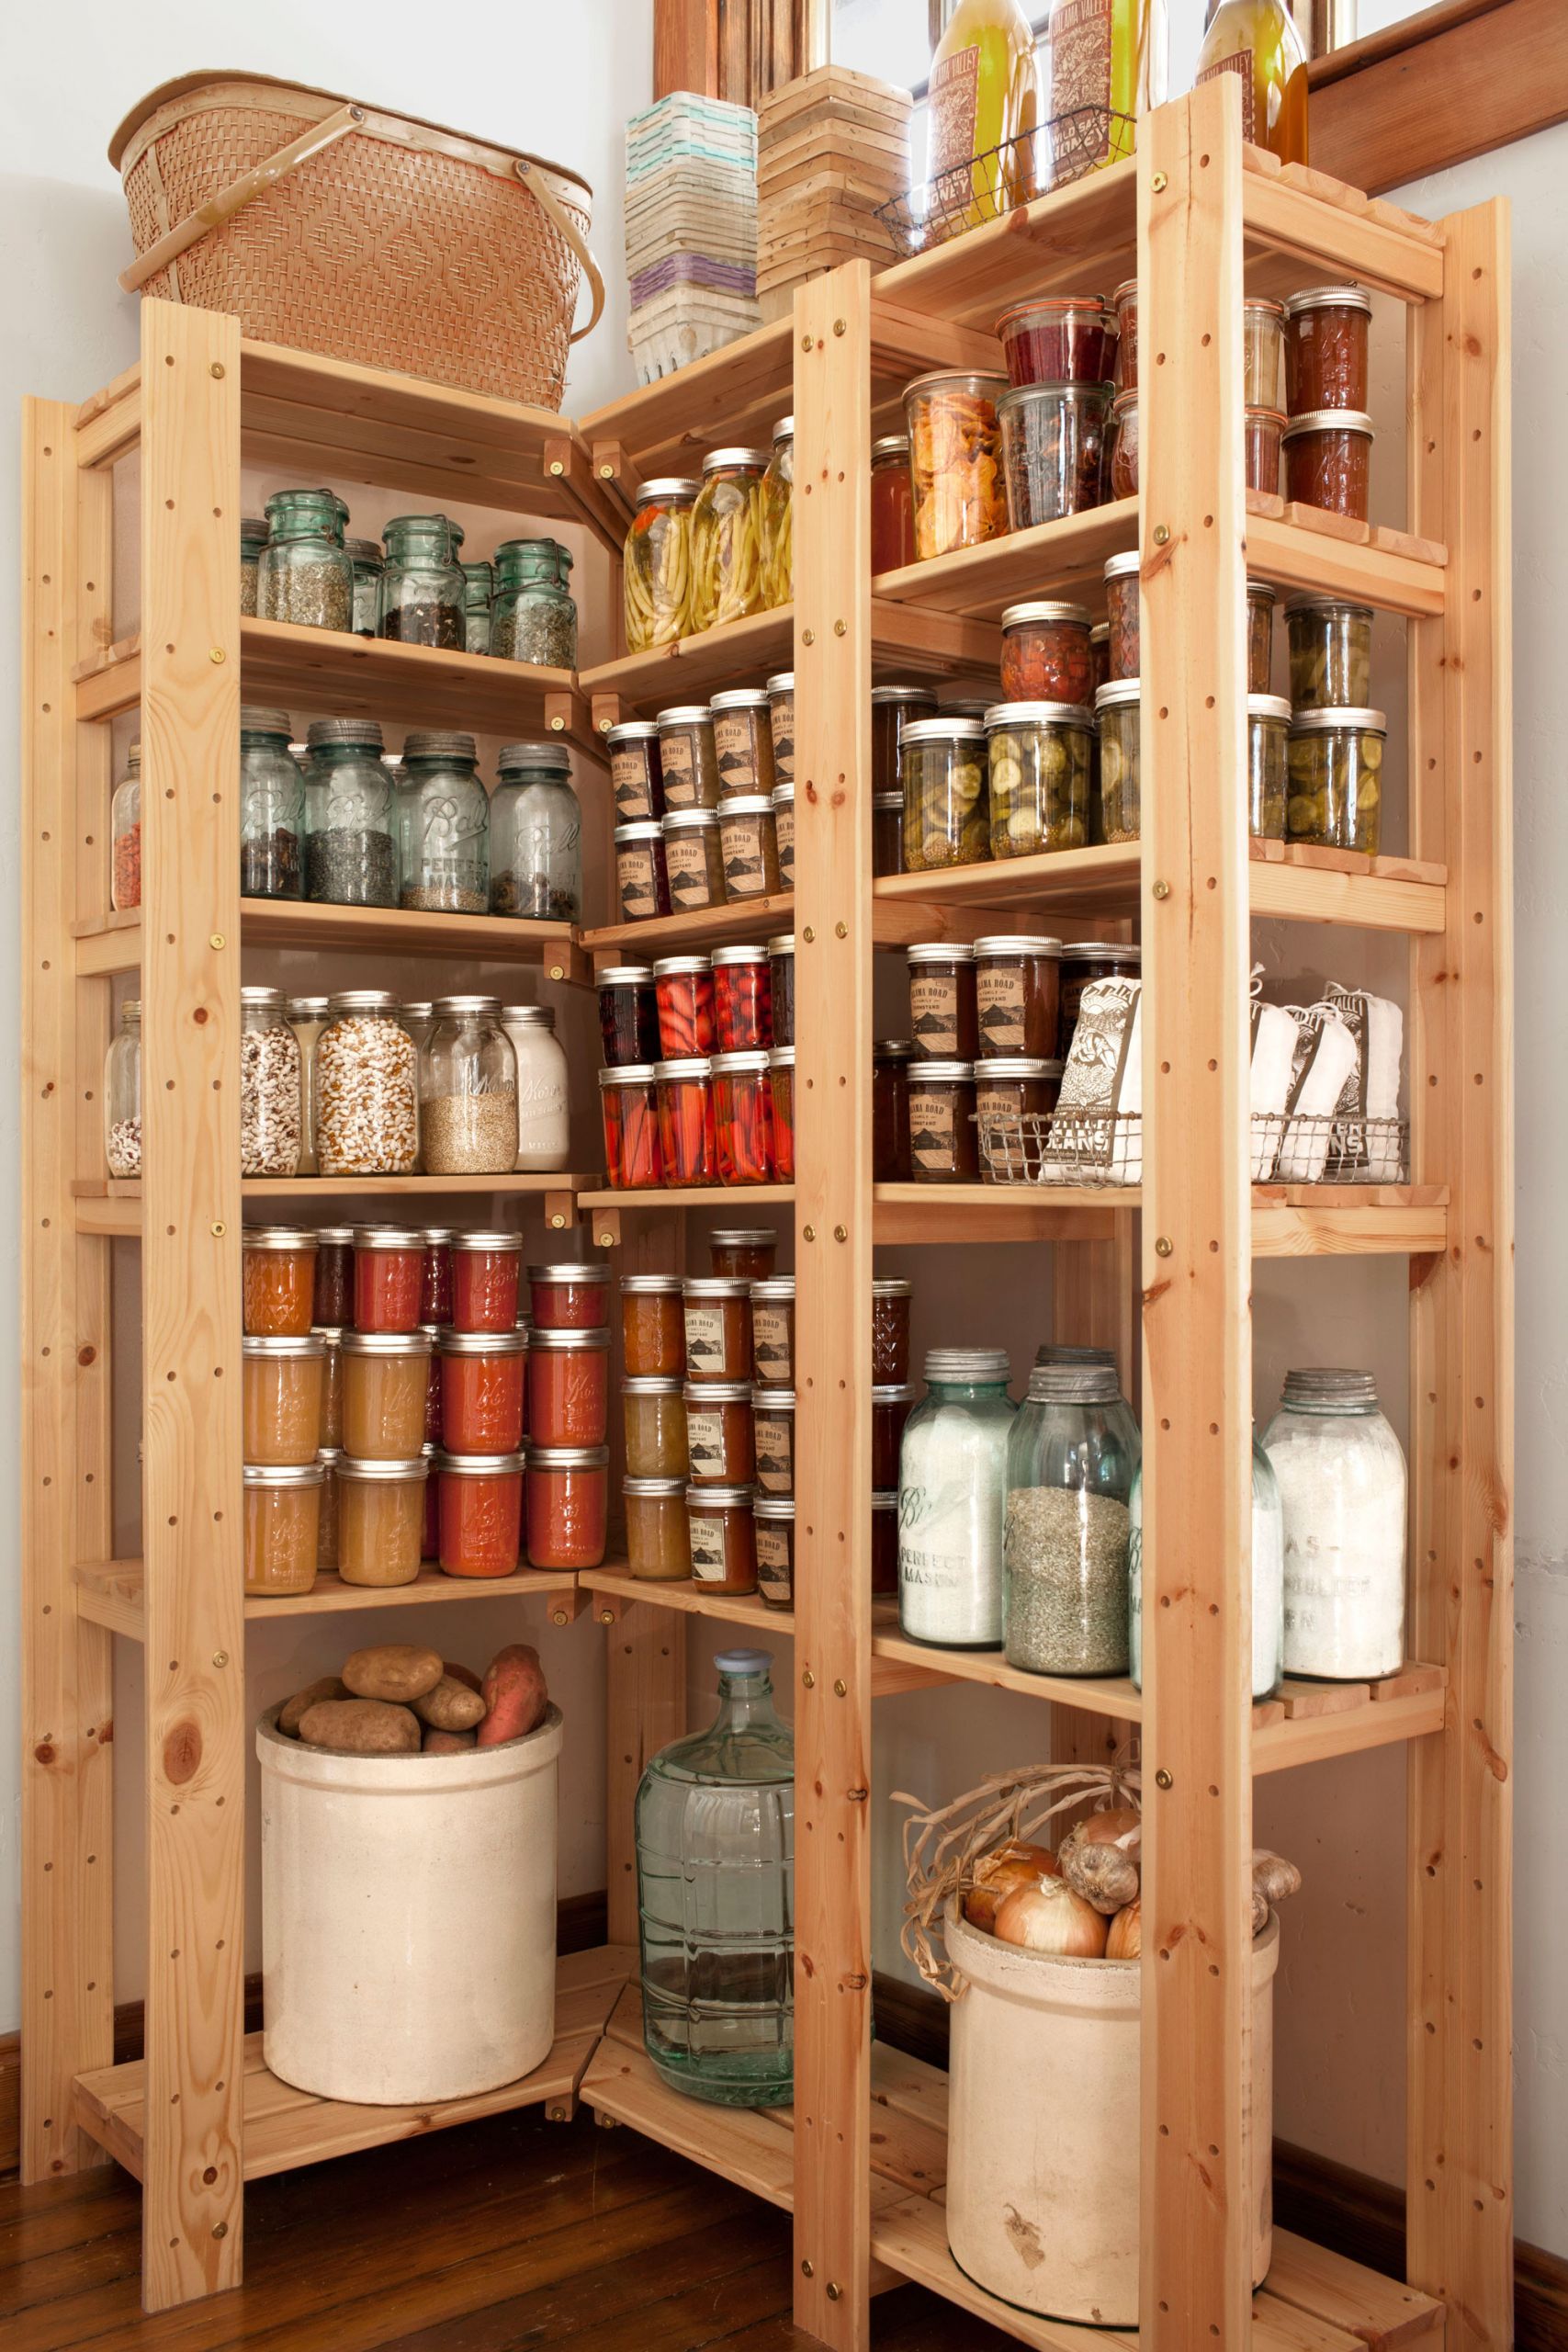 Kitchen Pantry Organizers
 14 Smart Ideas for Kitchen Pantry Organization Pantry